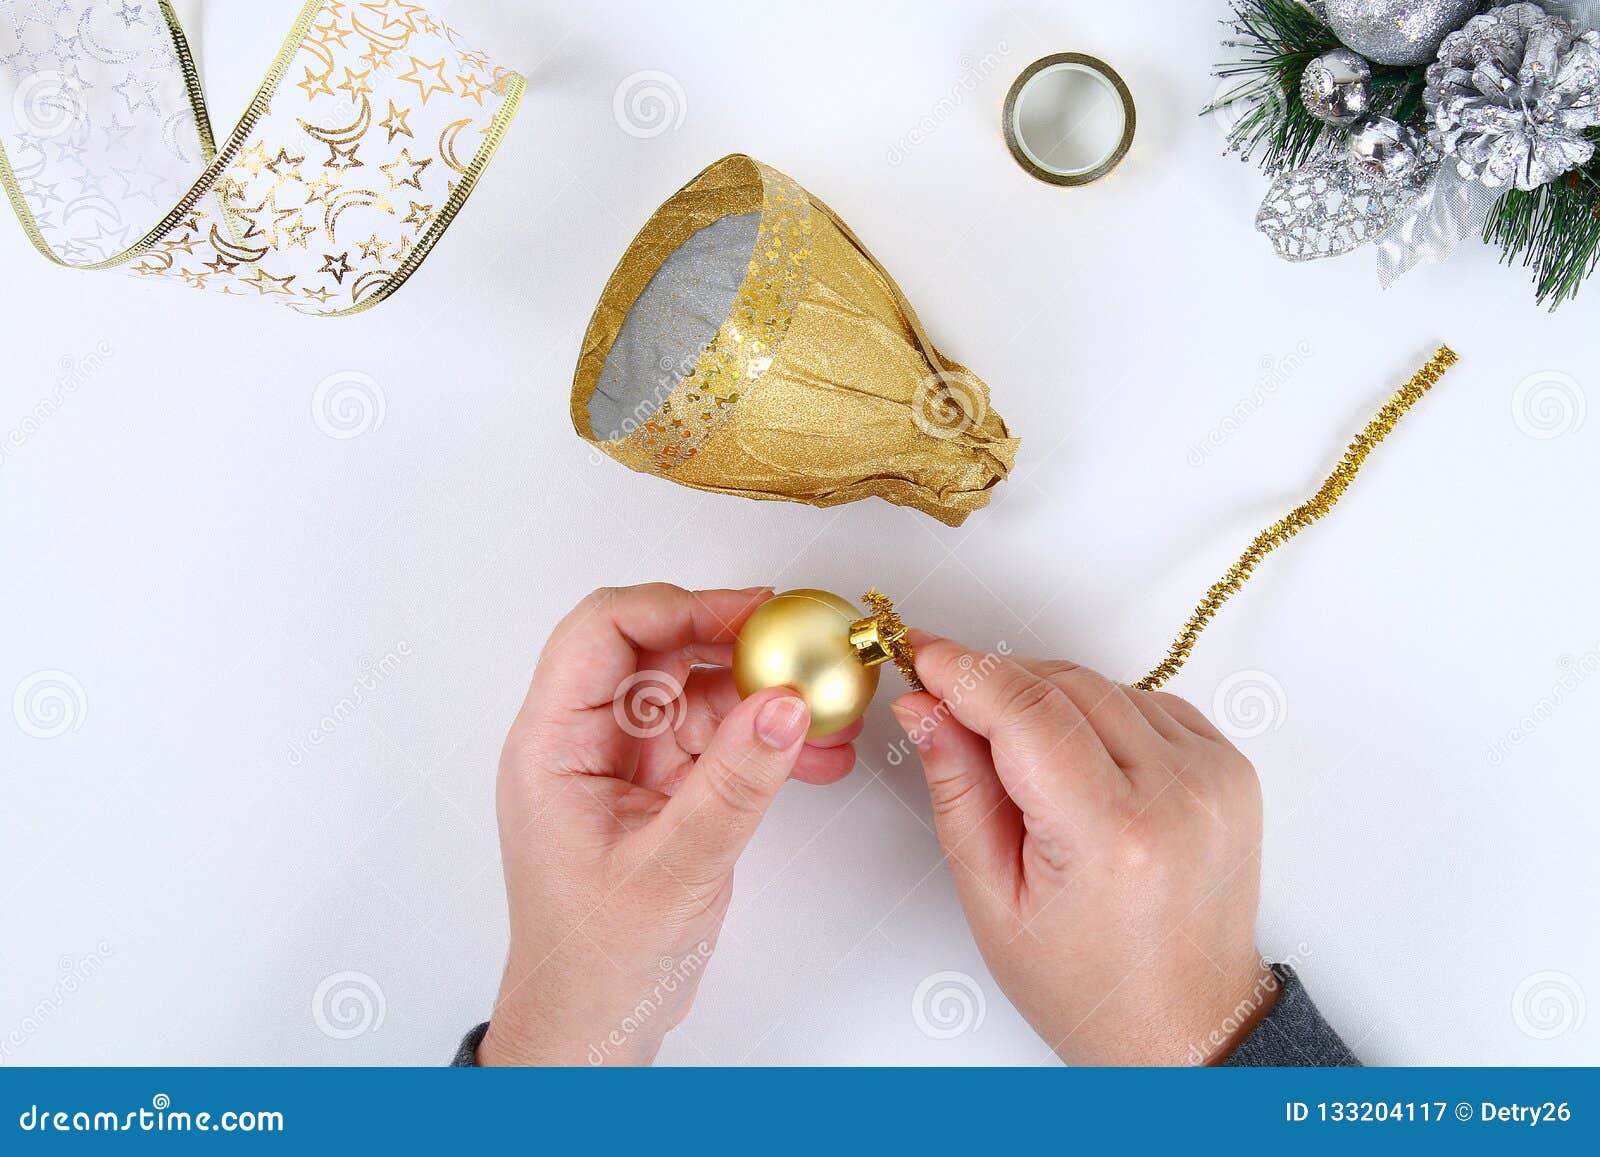 DIY Gold Bell From A Plastic Bottle. Guide On The Photo How To Make A Decorative Bell From A ...